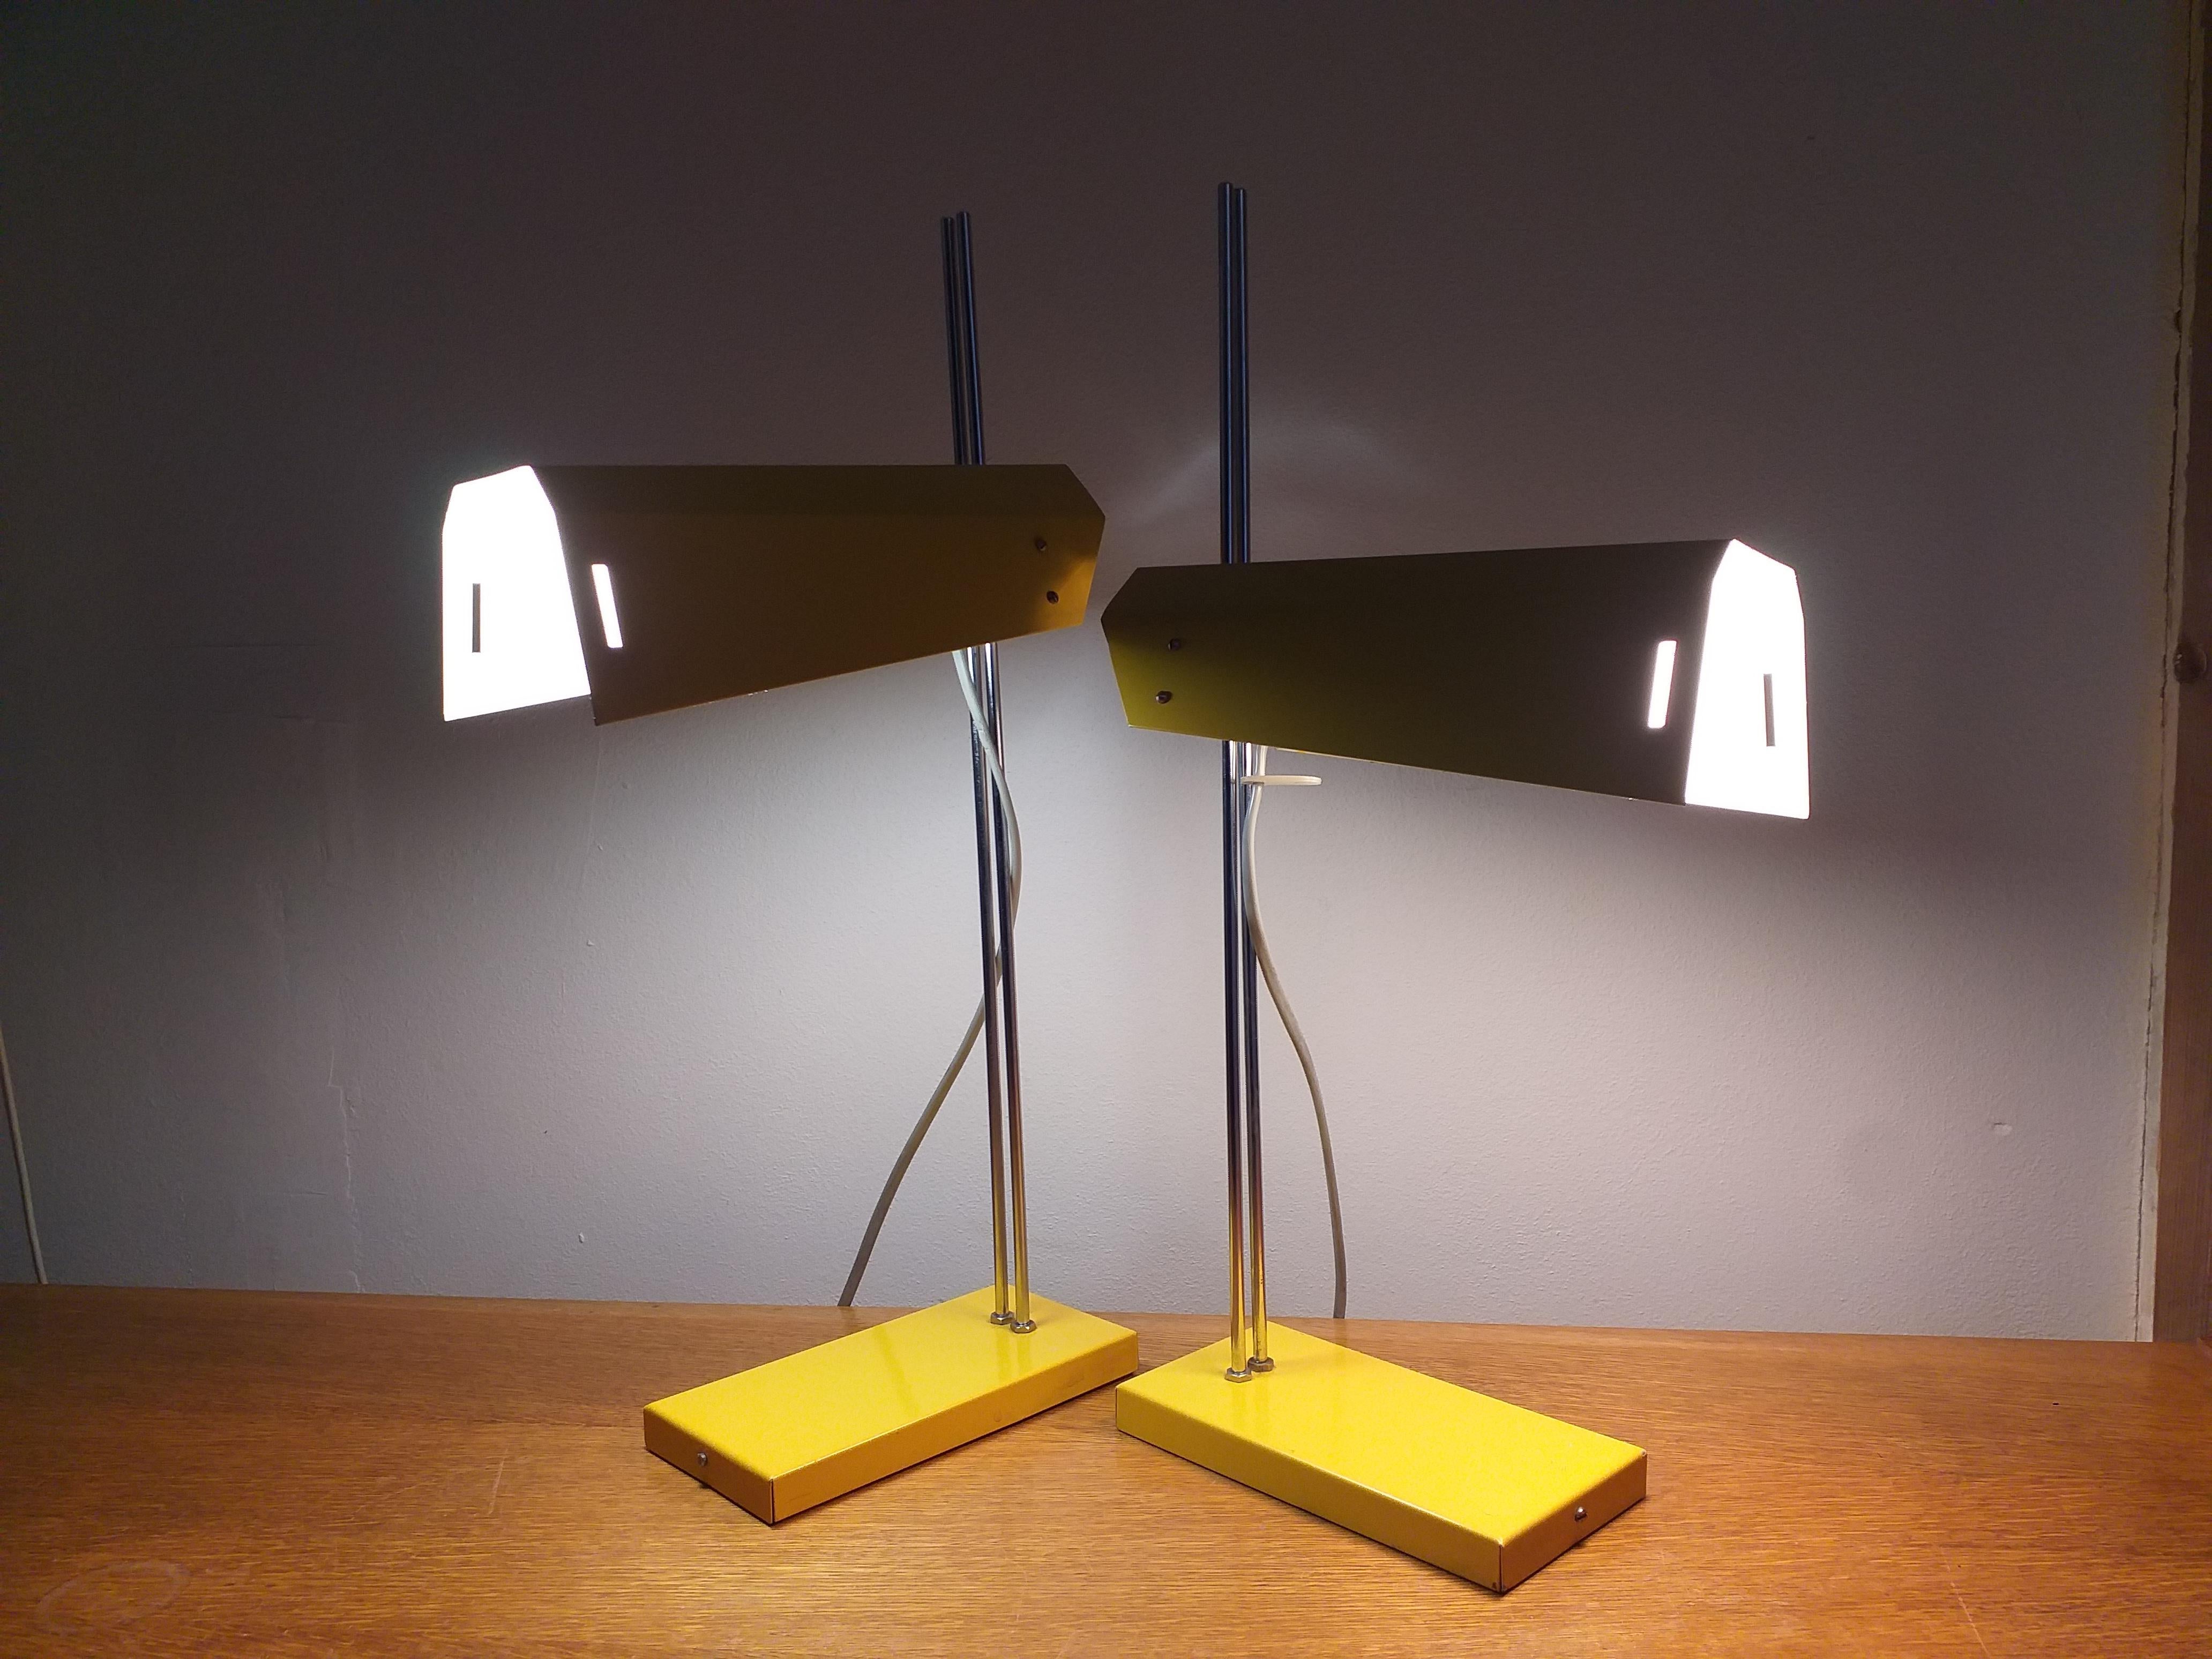 Metal Pair of Midcentury Table Lamps Lidokov, Designed by Josef Hurka, 1970s For Sale